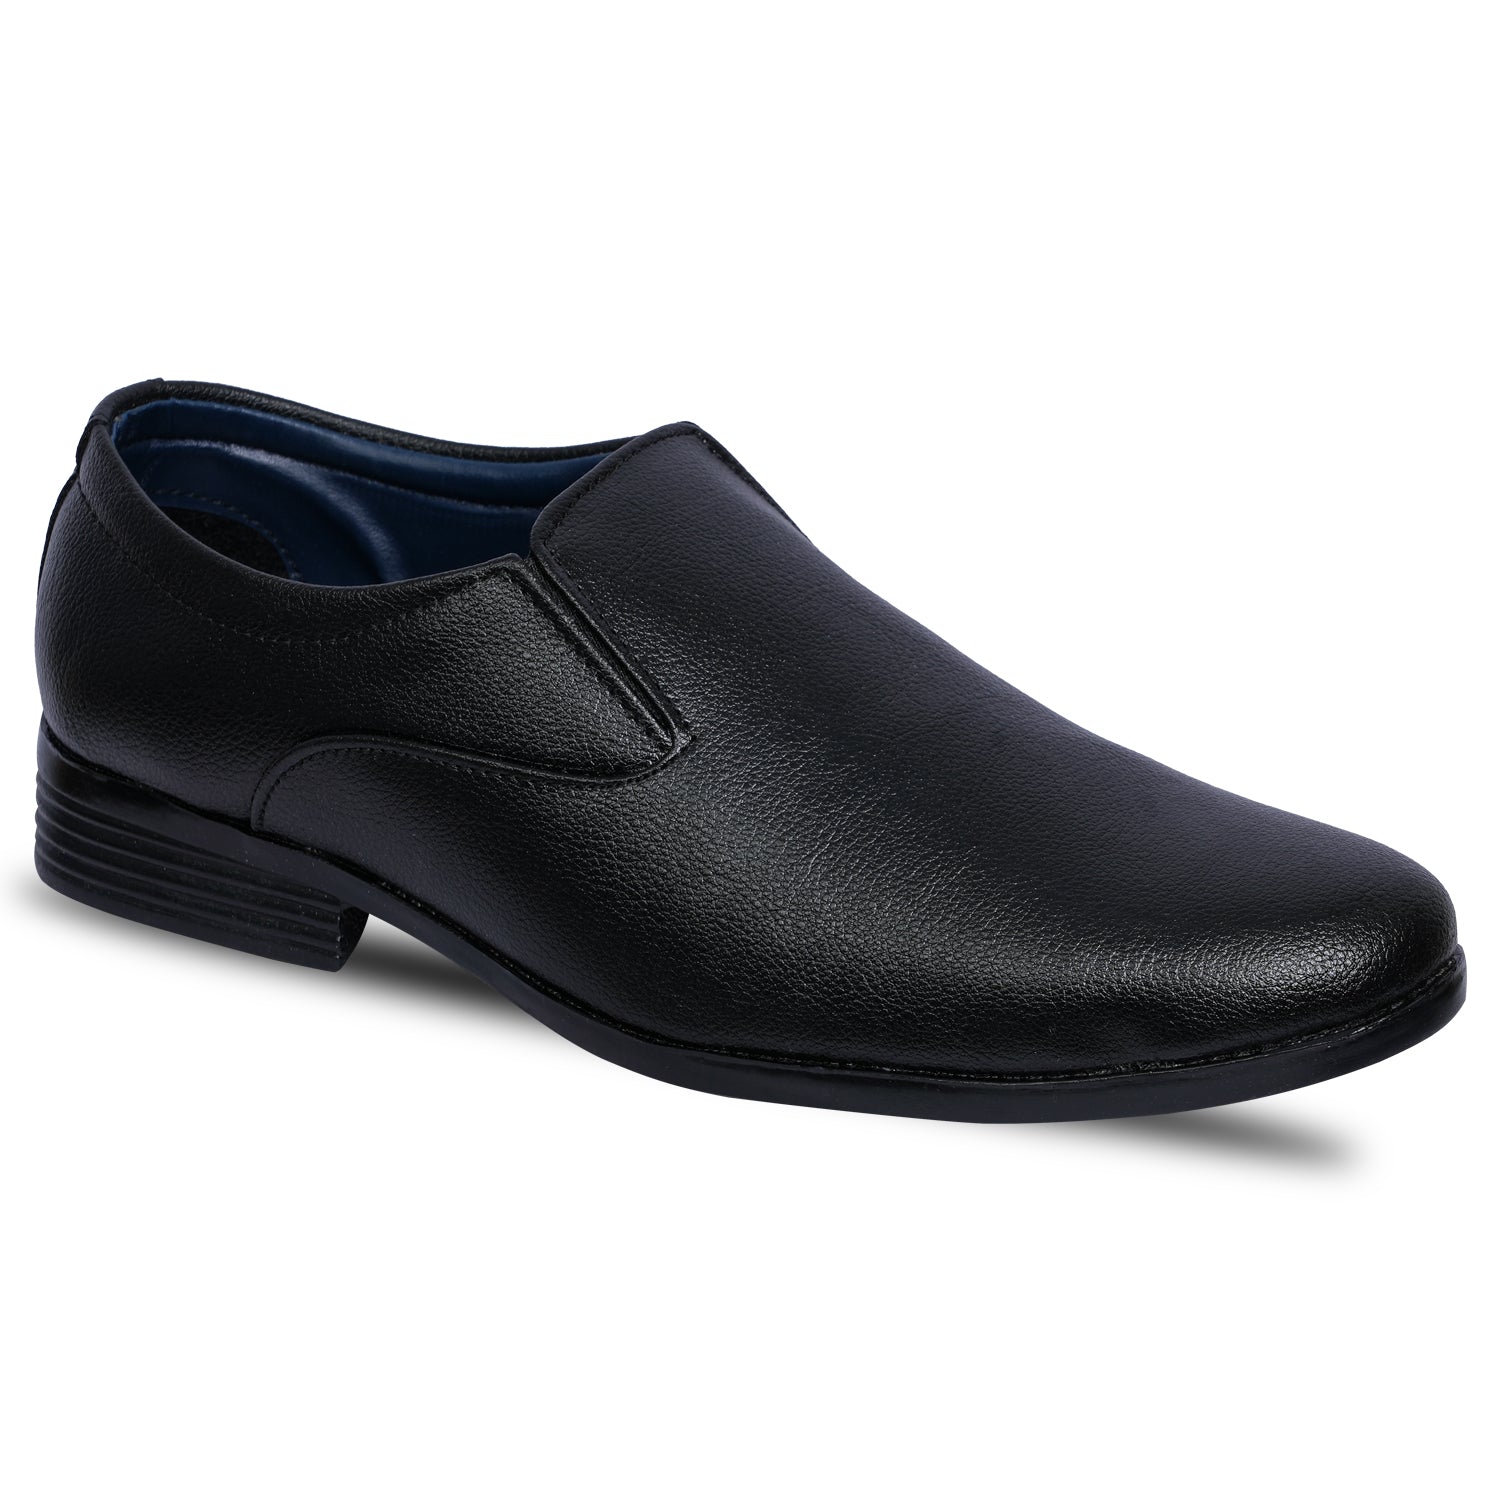 Paragon R2007G Men Formal Shoes | Corporate Office Shoes | Smart &amp; Sleek Design | Comfortable Sole with Cushioning | Daily &amp; Occasion Wear